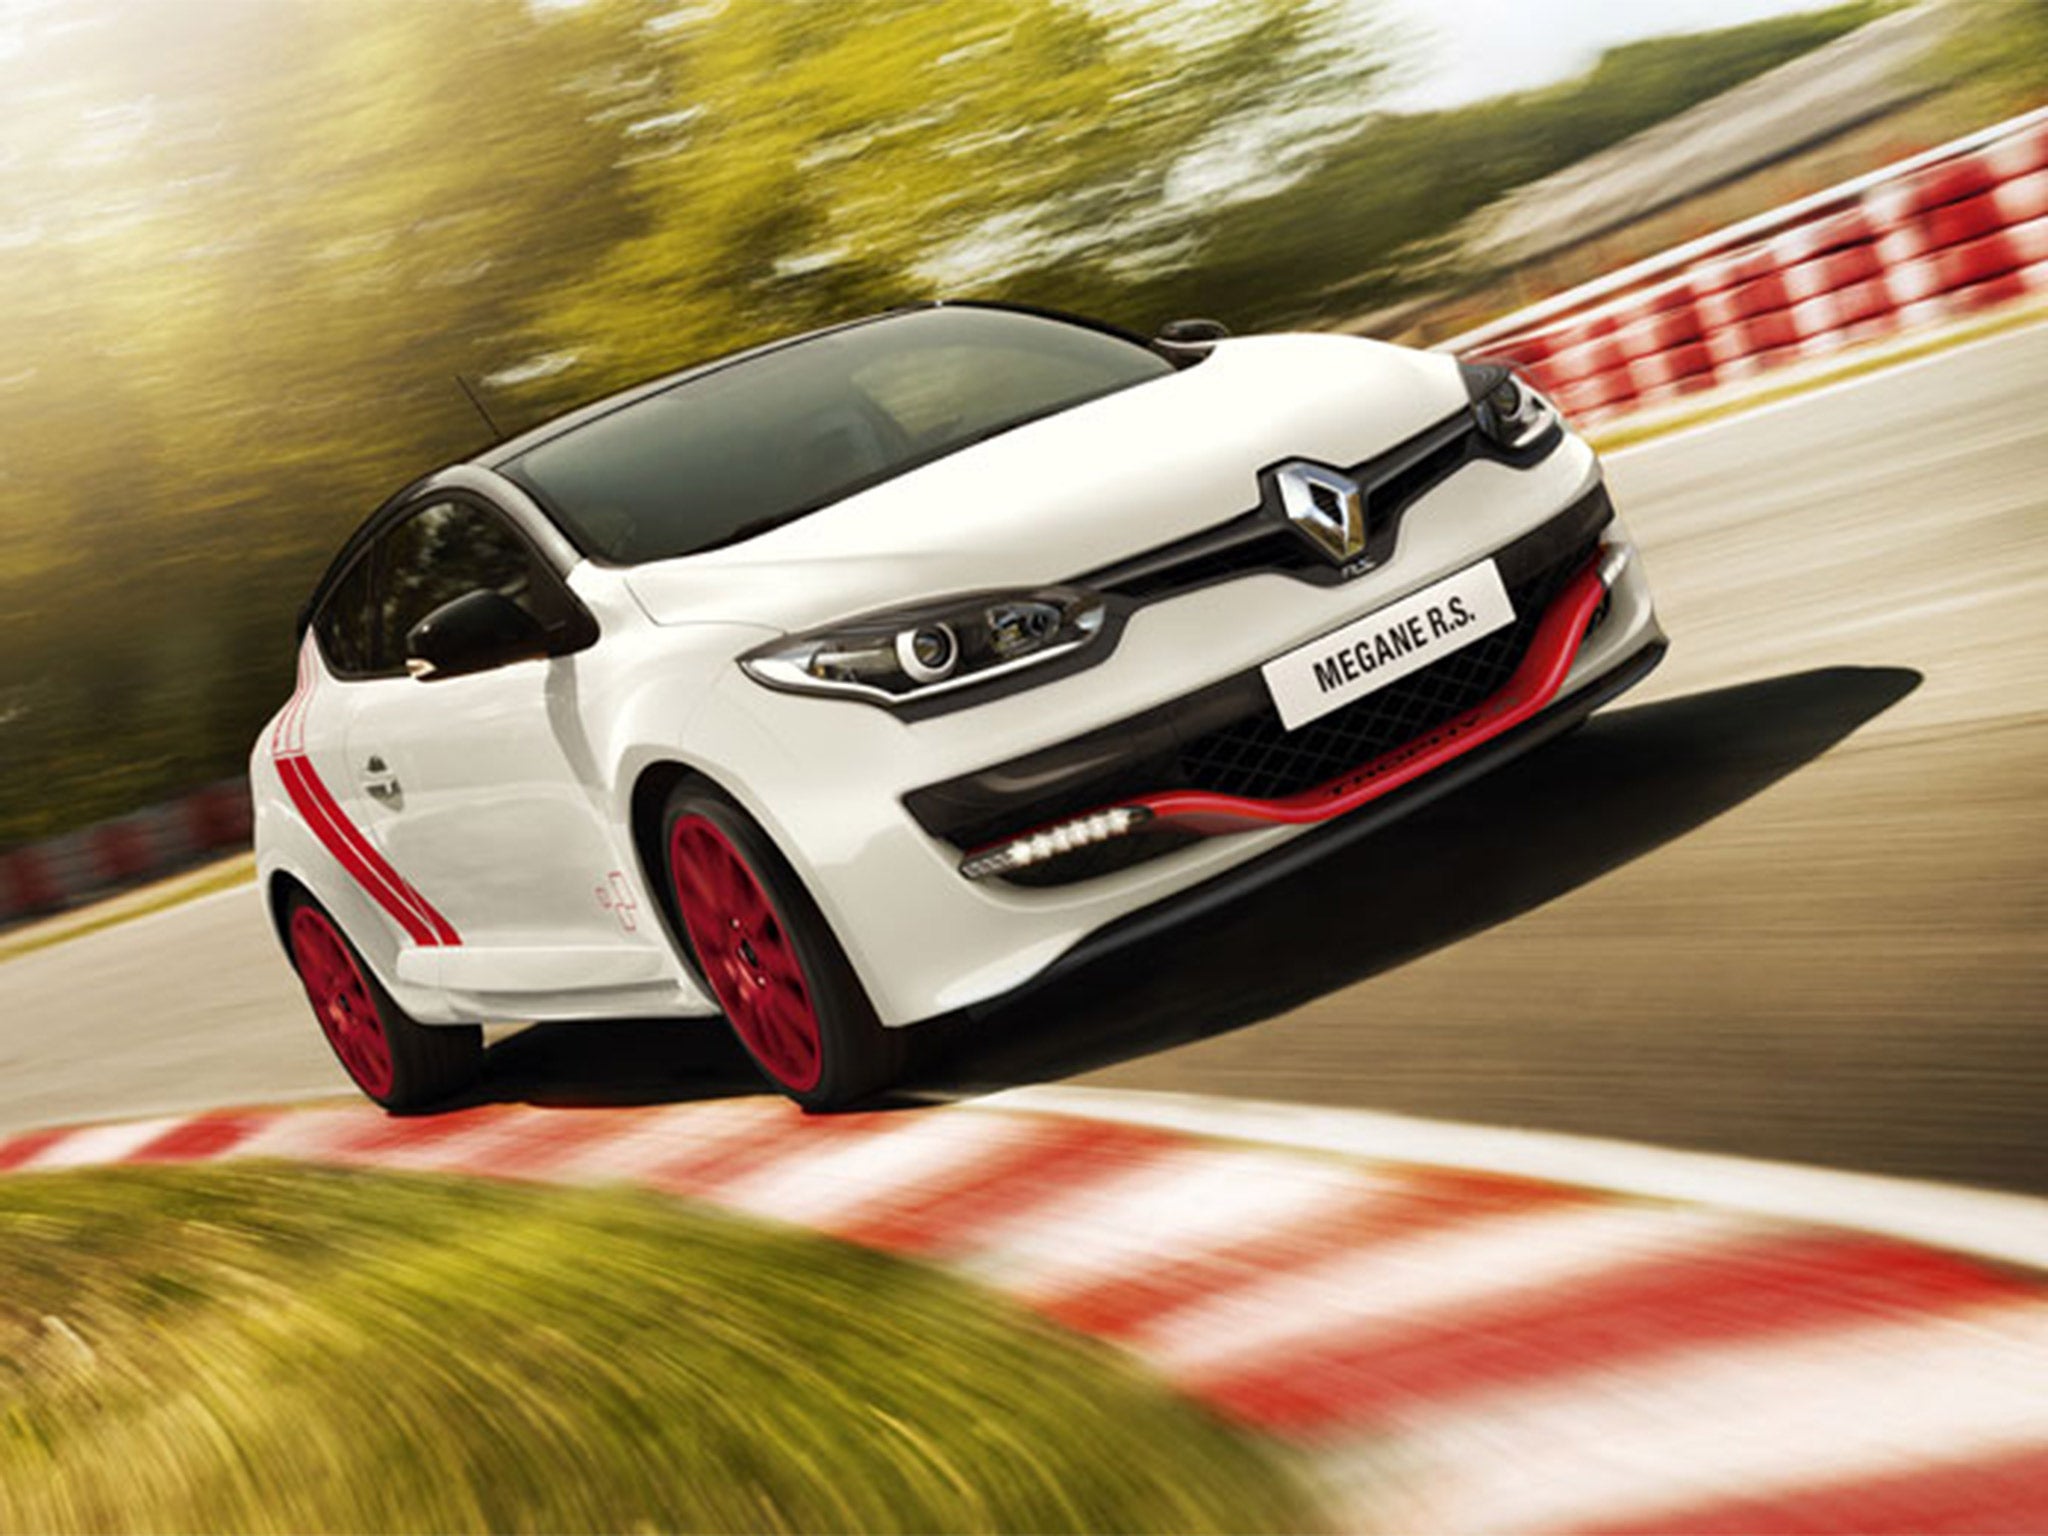 Wild thing: the new Renault Megane Renaultsport 275 Trophy-R